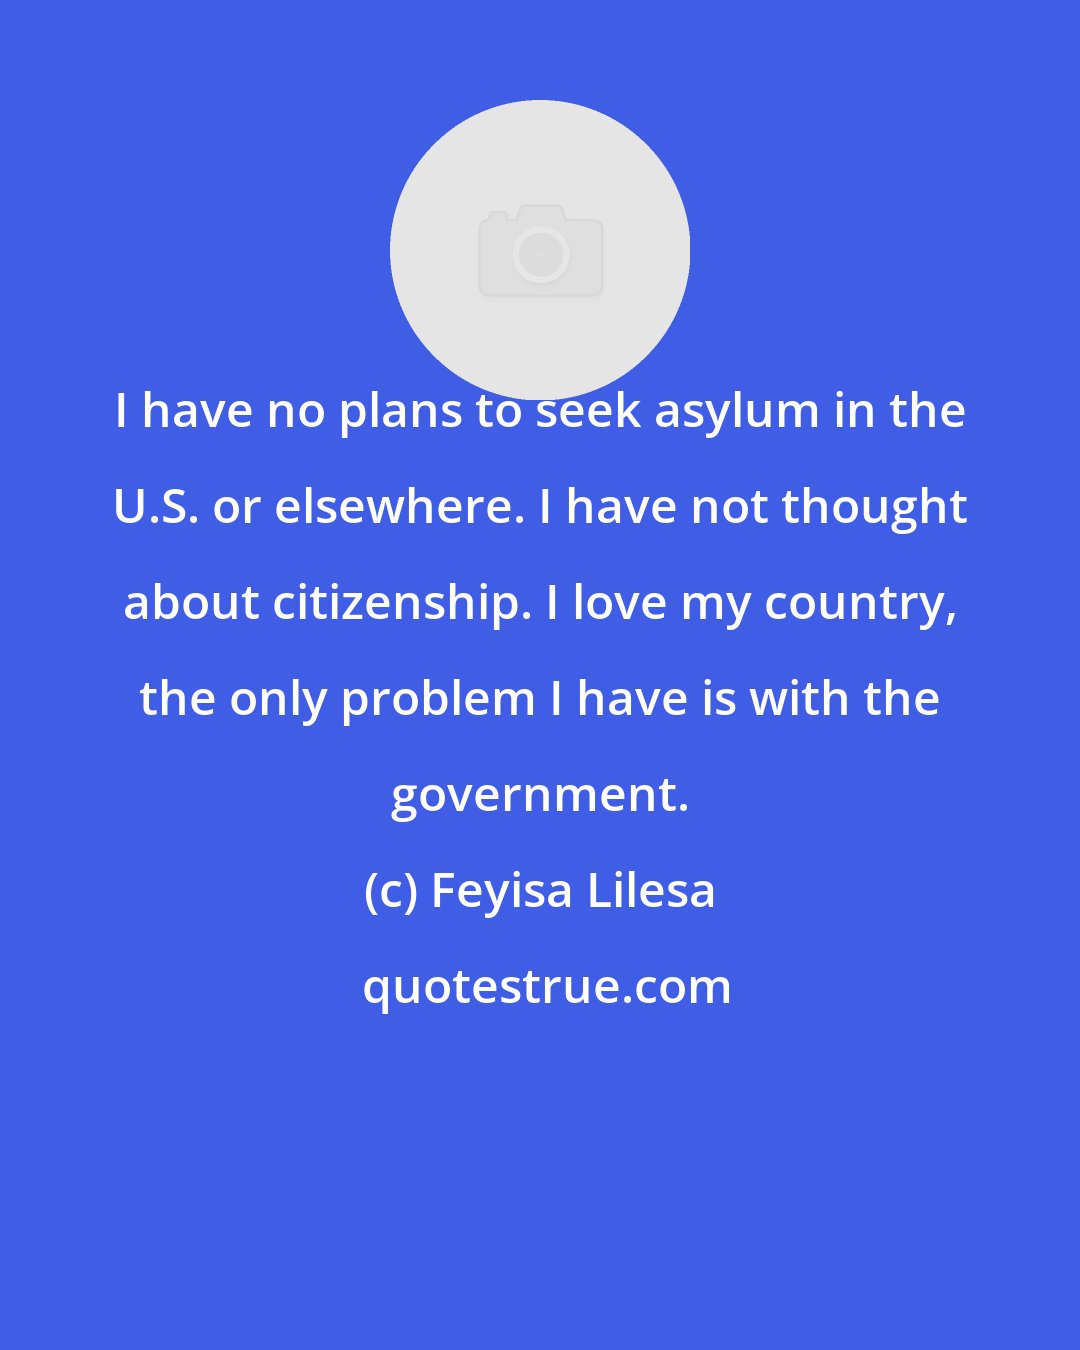 Feyisa Lilesa: I have no plans to seek asylum in the U.S. or elsewhere. I have not thought about citizenship. I love my country, the only problem I have is with the government.